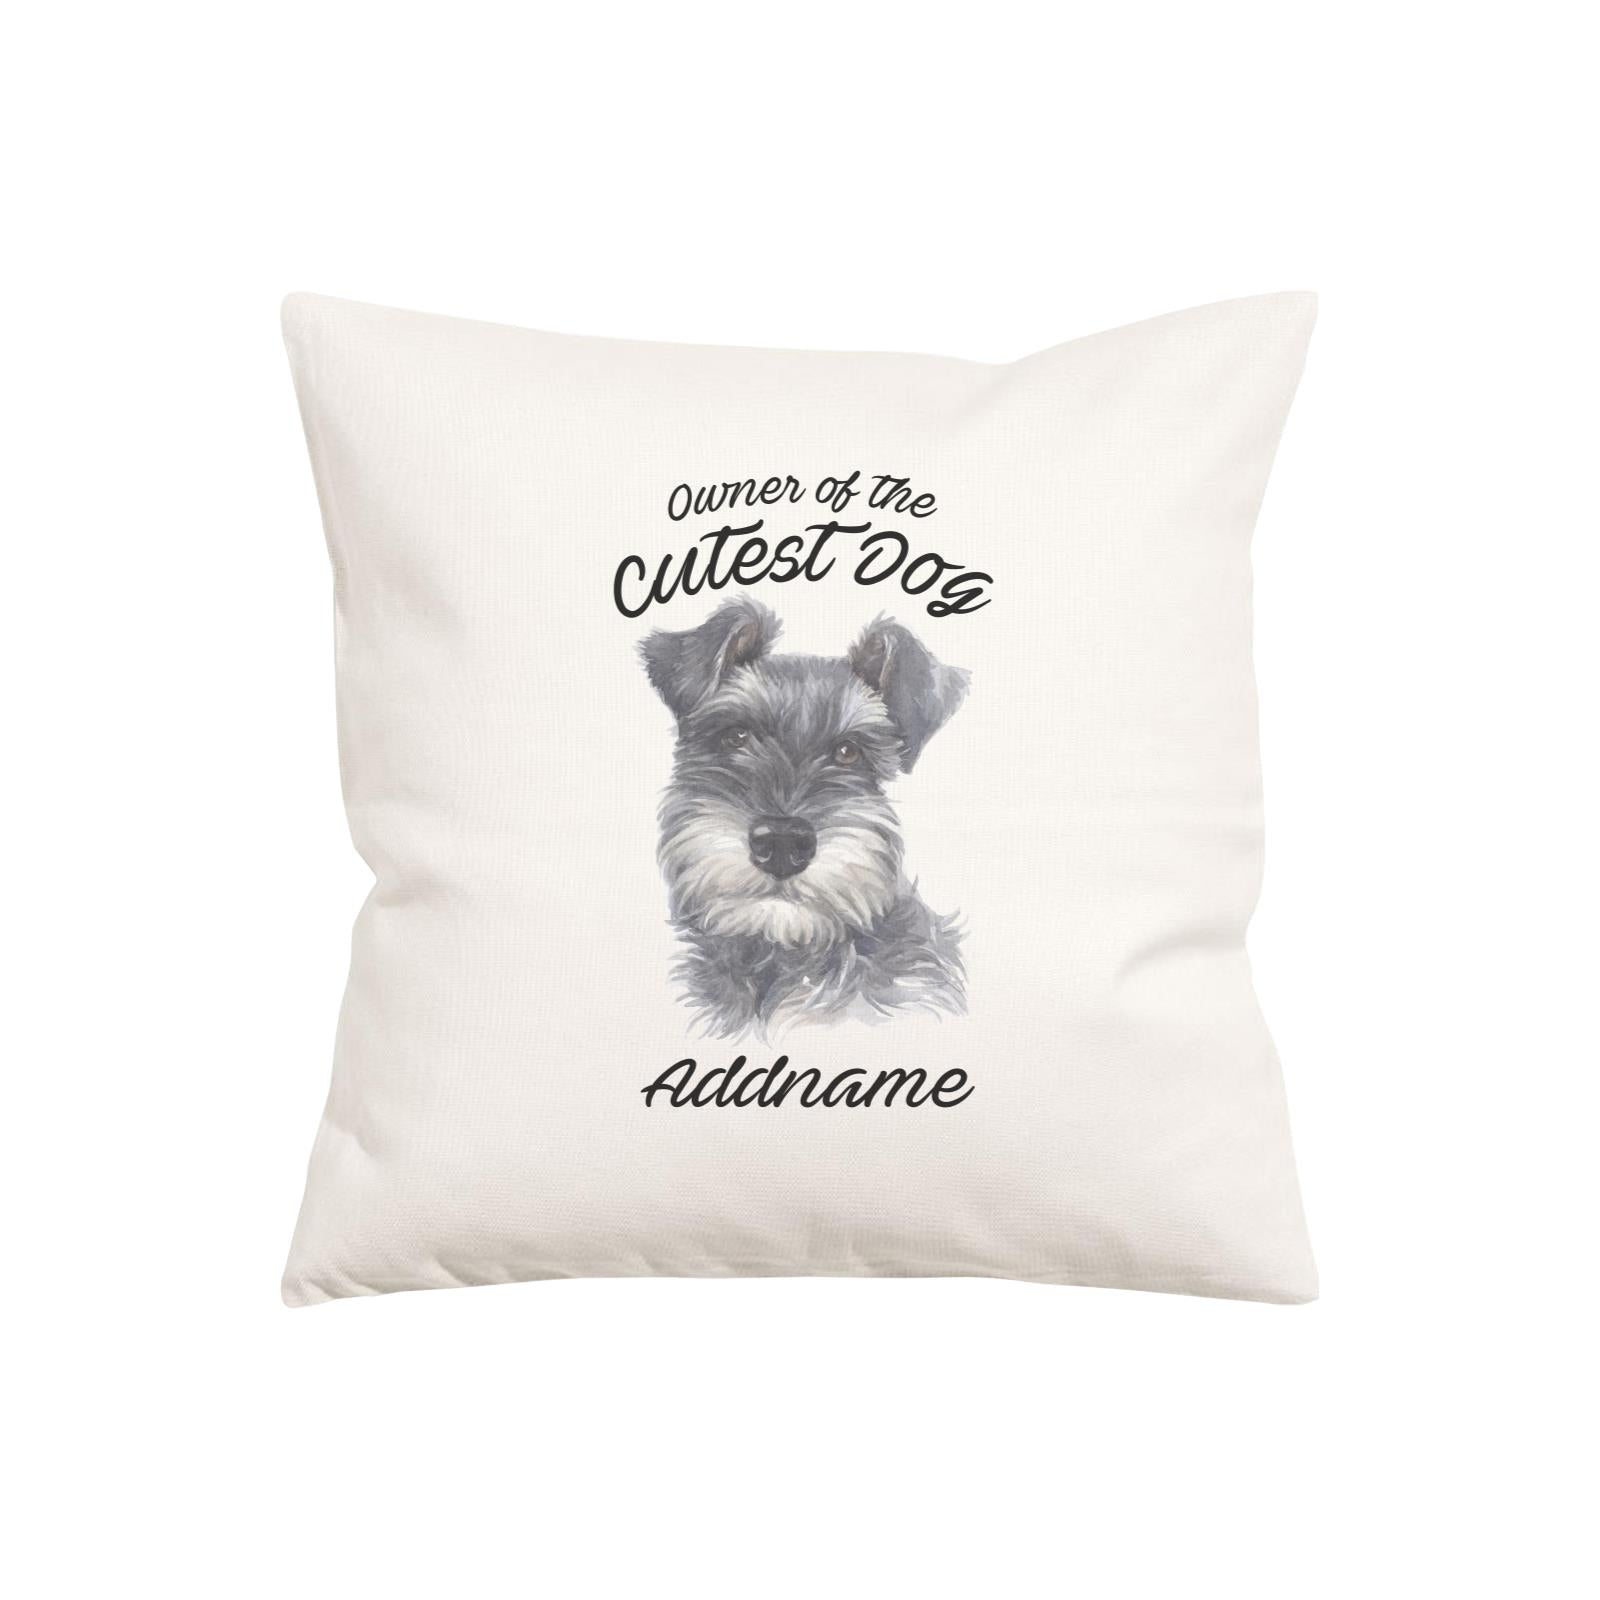 Watercolor Dog Owner Of The Cutest Dog Schnauzer Black Addname Pillow Cushion